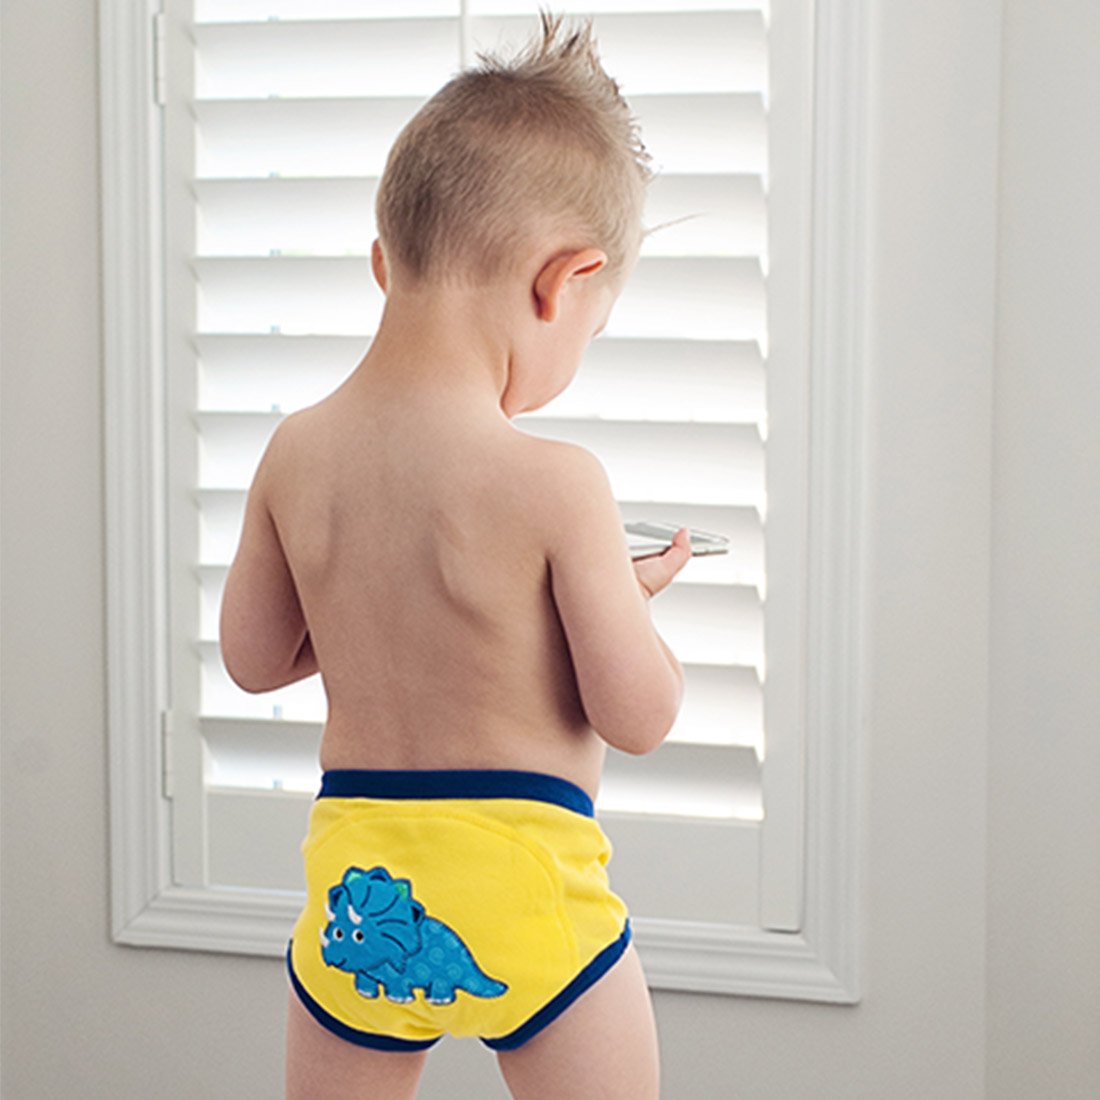 Reusable Potty Training Pants For Toddlers | POPSUGAR Family